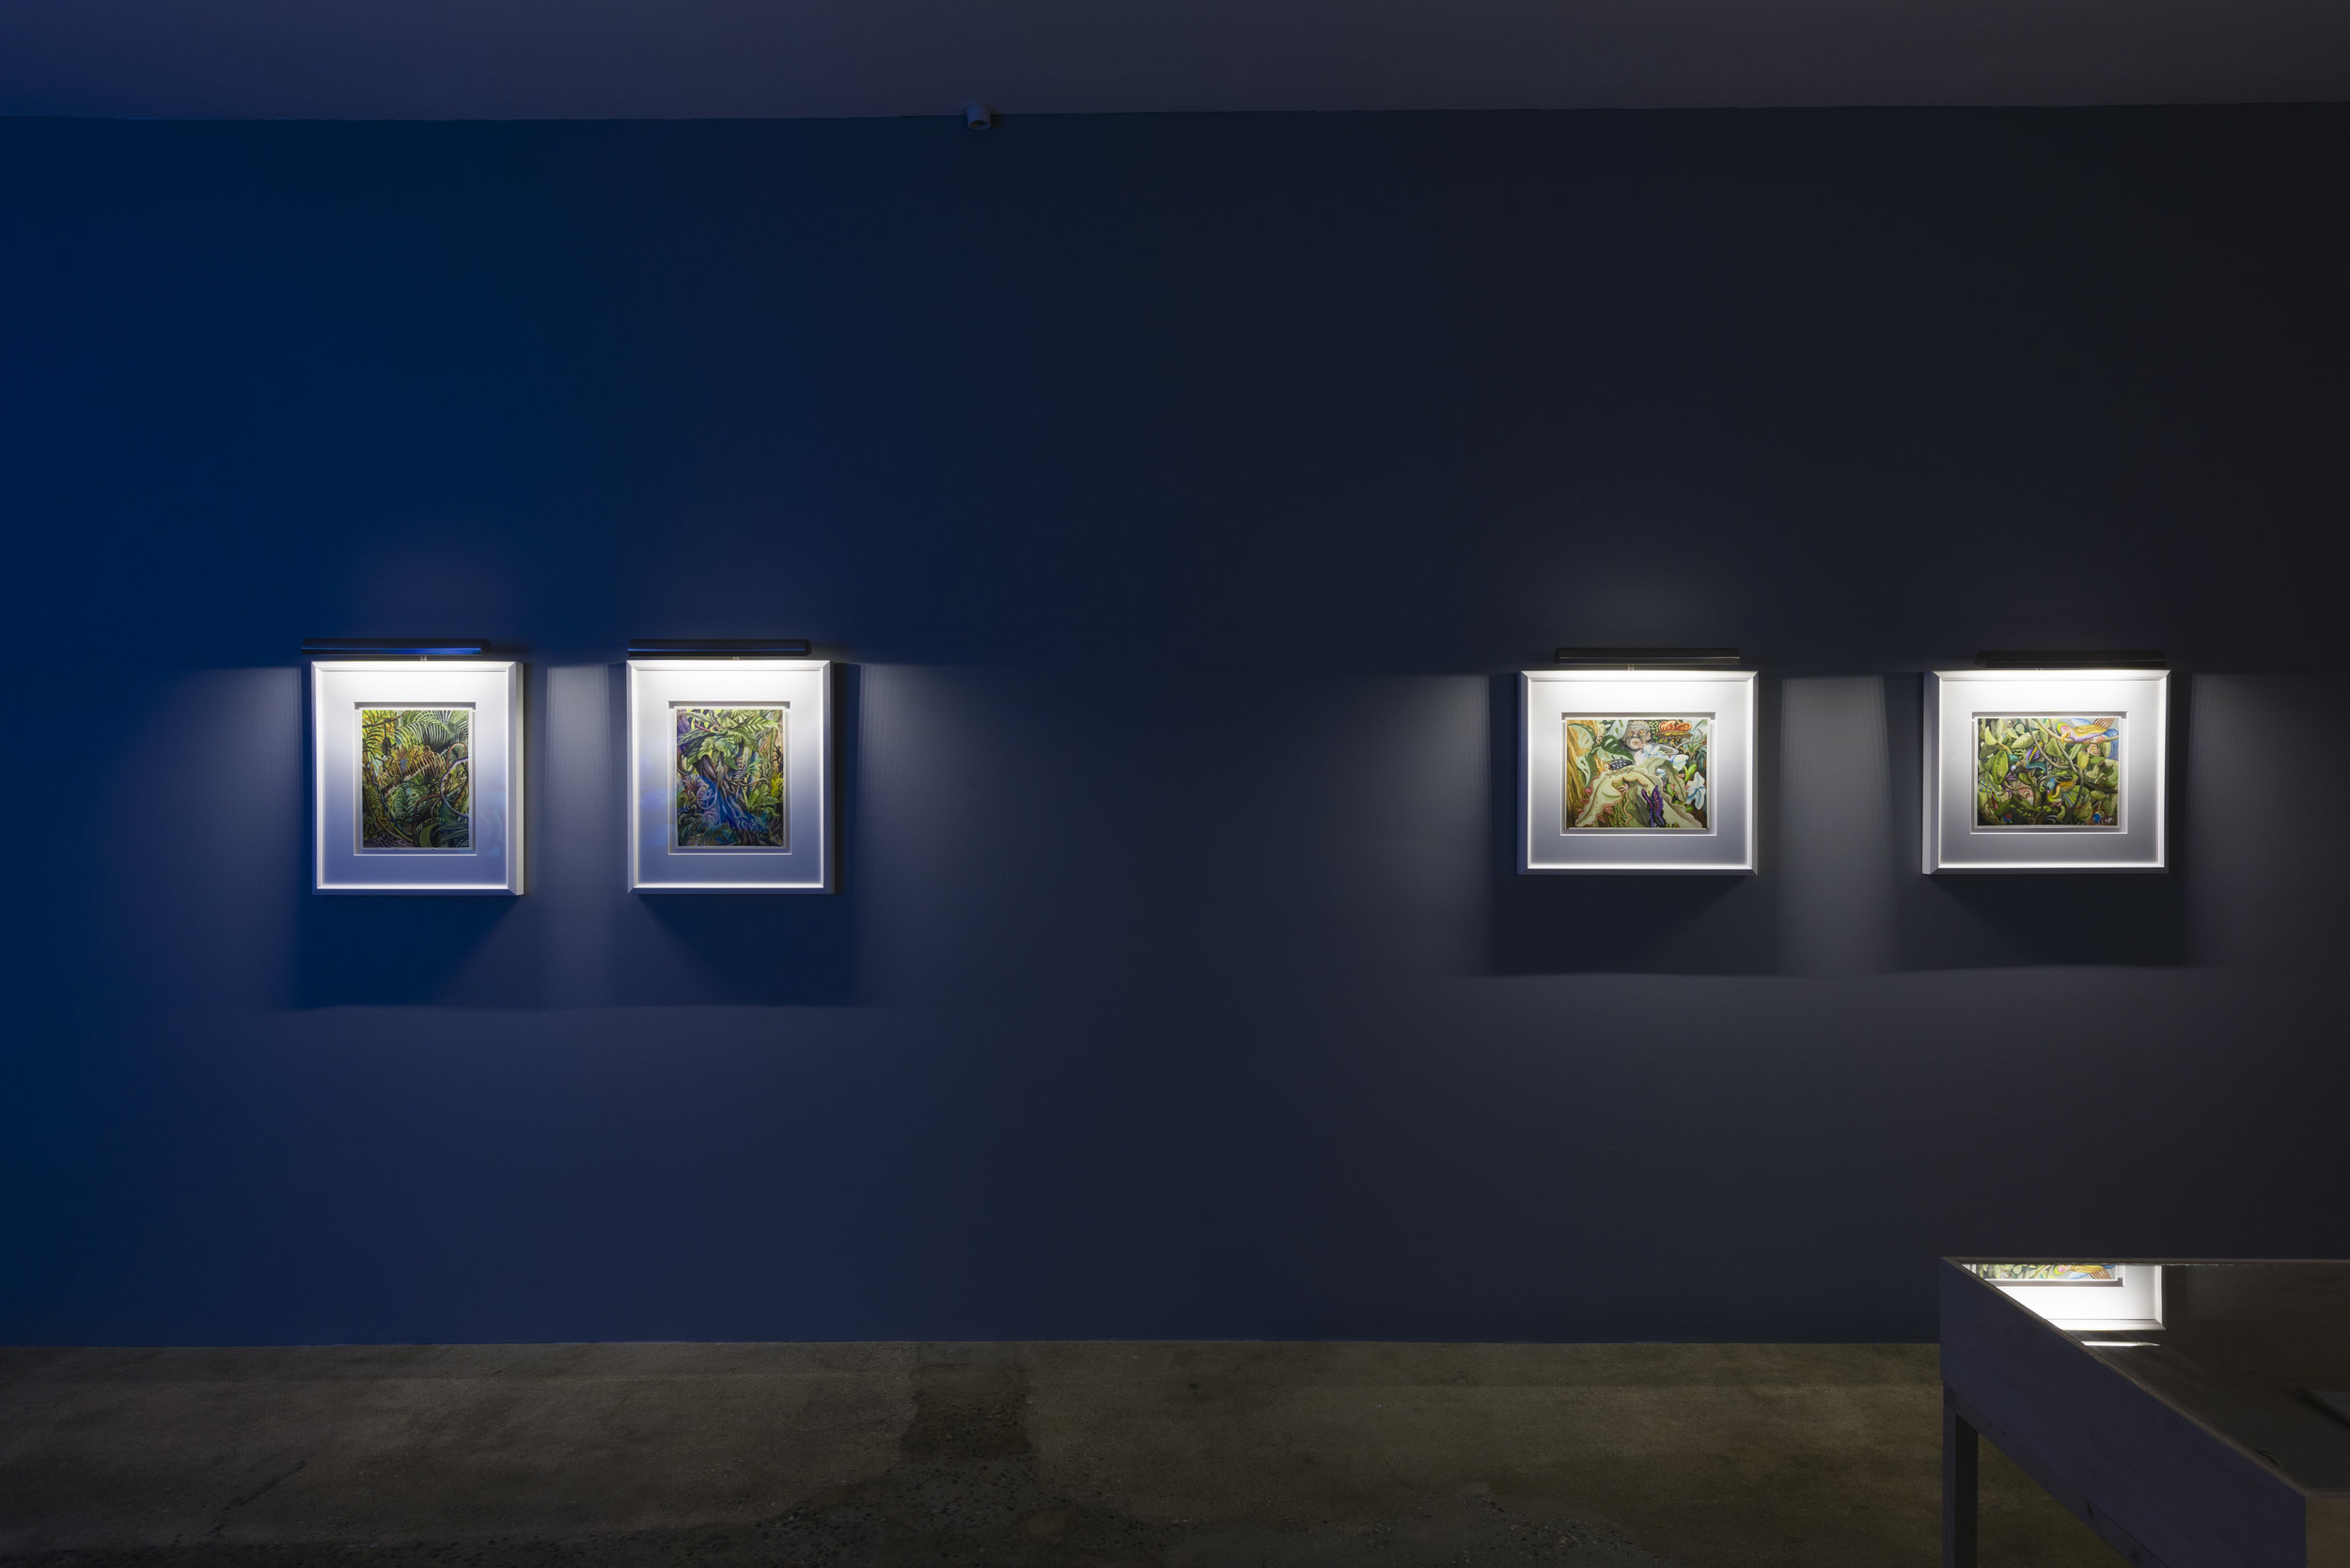  Installation view of Suzan Pitt:  Joy Street   March 31 - May 5, 2019  Photo by Ruben Diaz   Link to press release.  